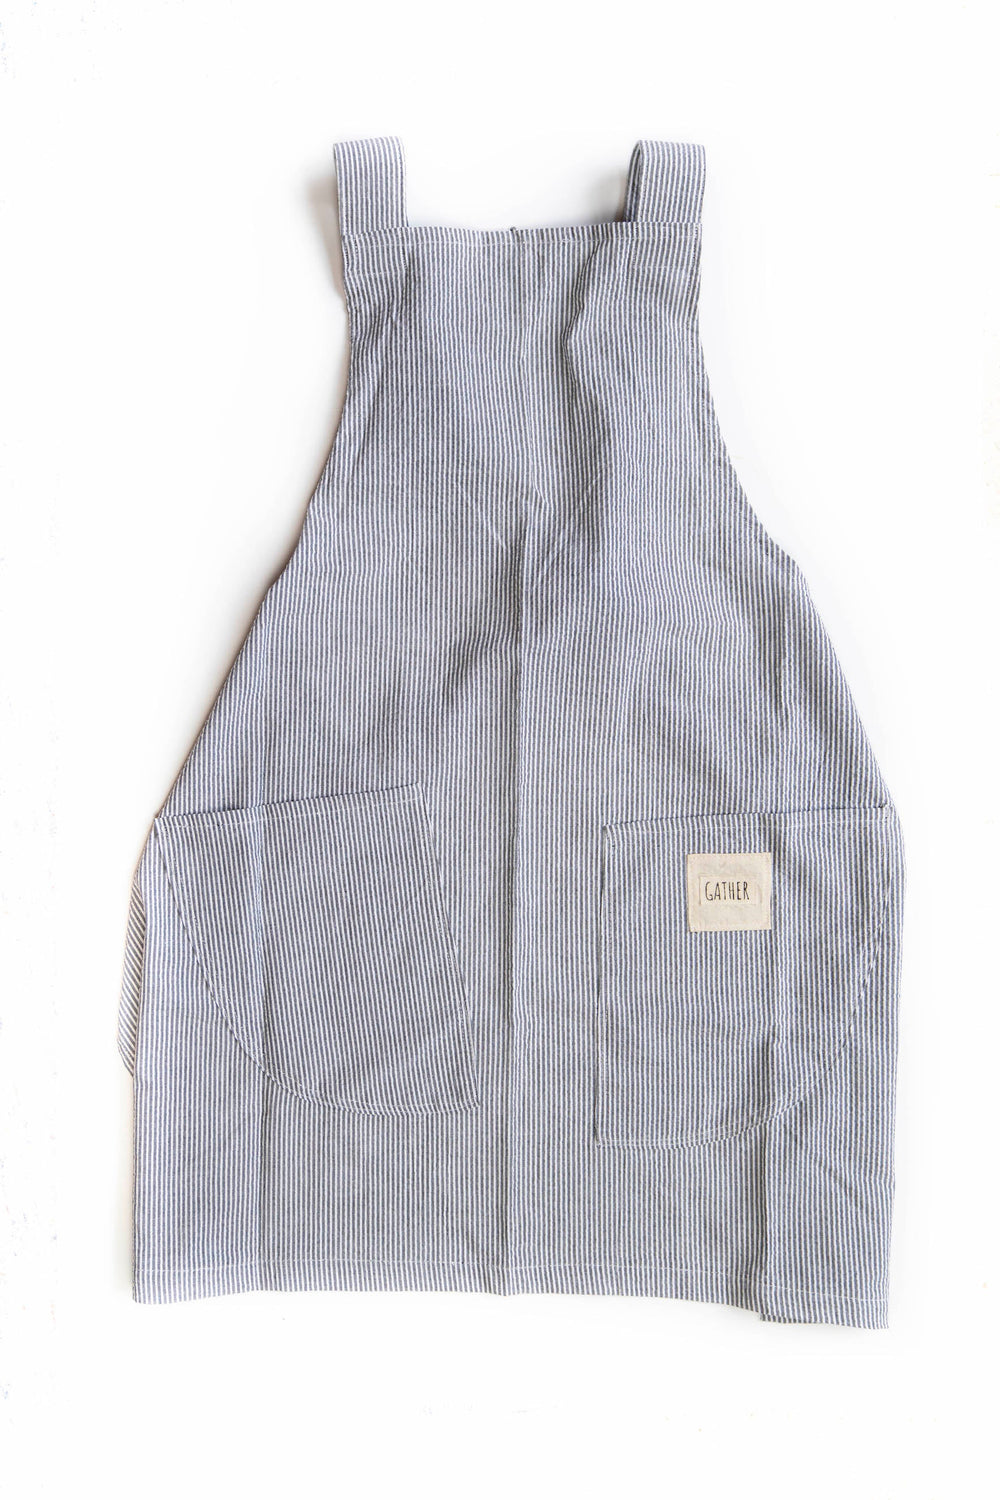 Harvest Apron by 2nd Story Goods